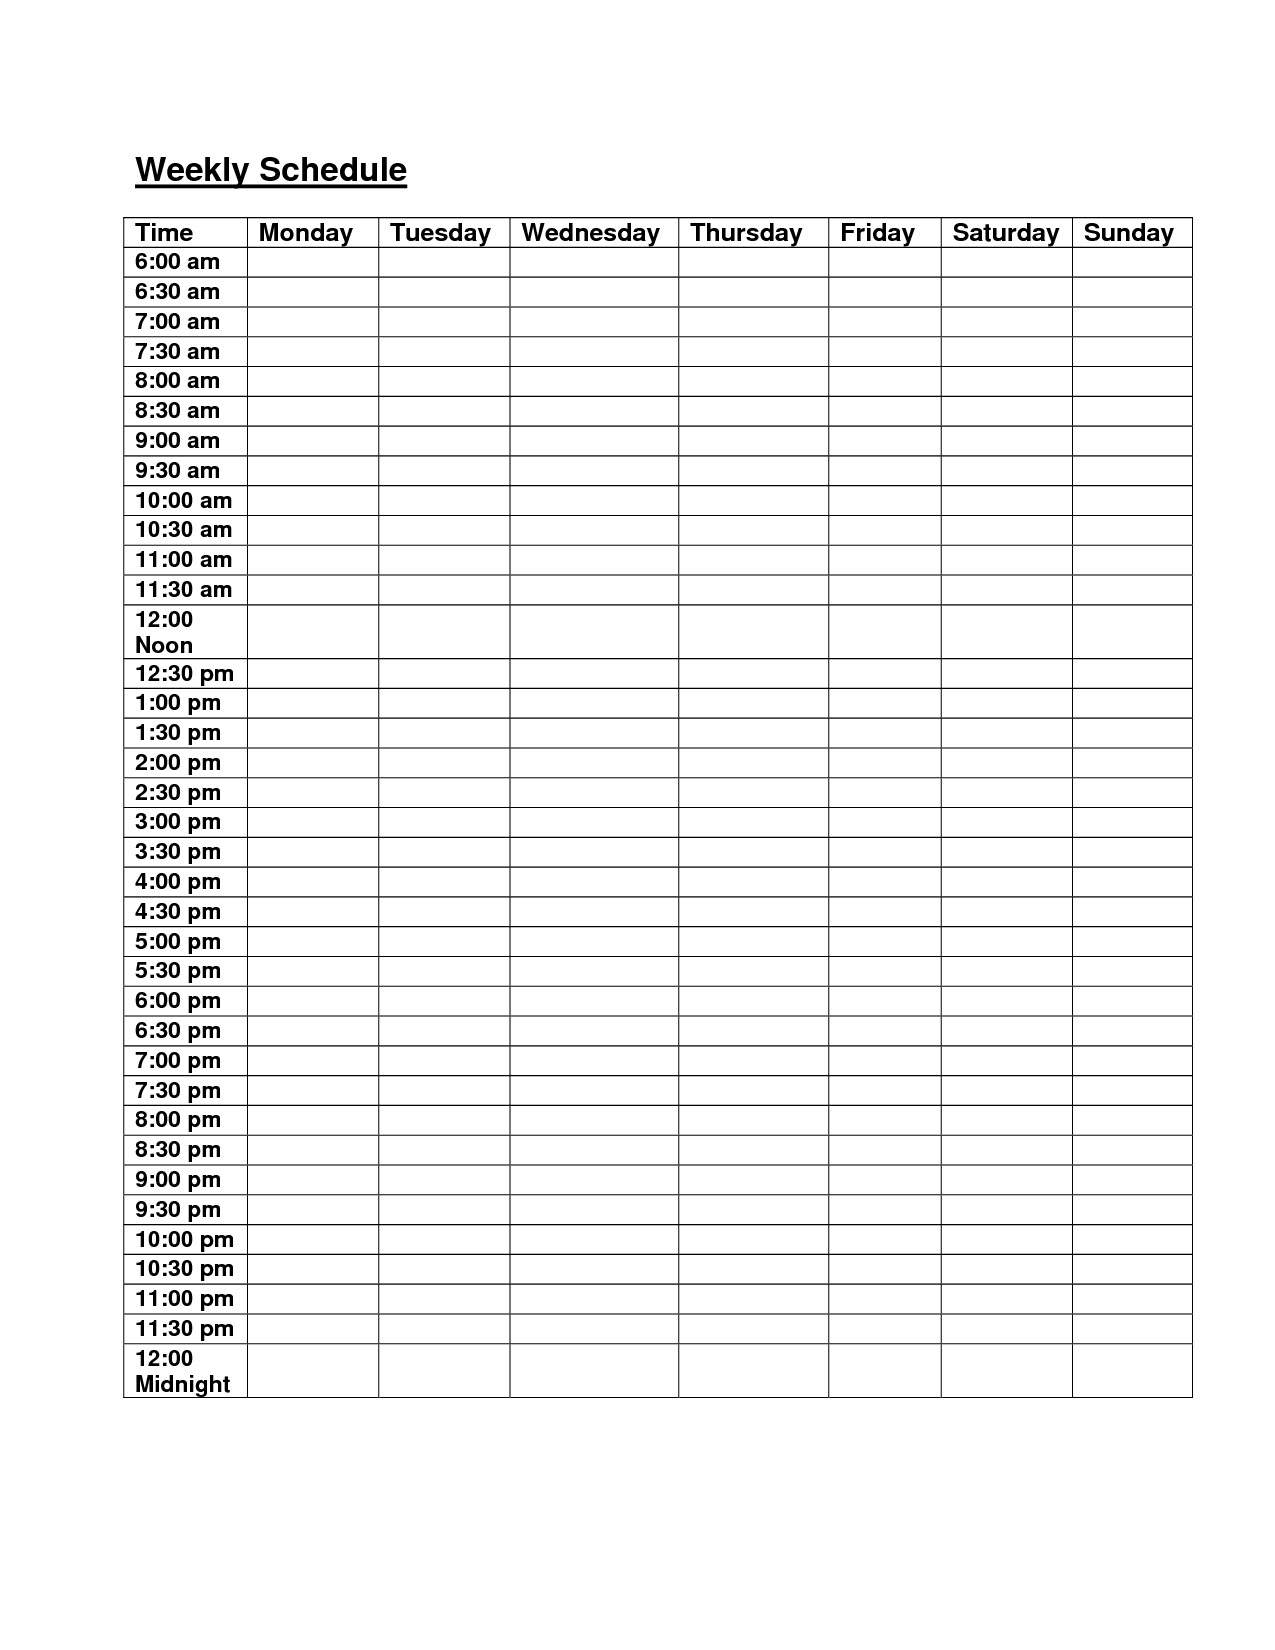 Weekly Schedule Template Monday Friday Qkgmvrjv | Printables-Monday To Friday Schedule Template